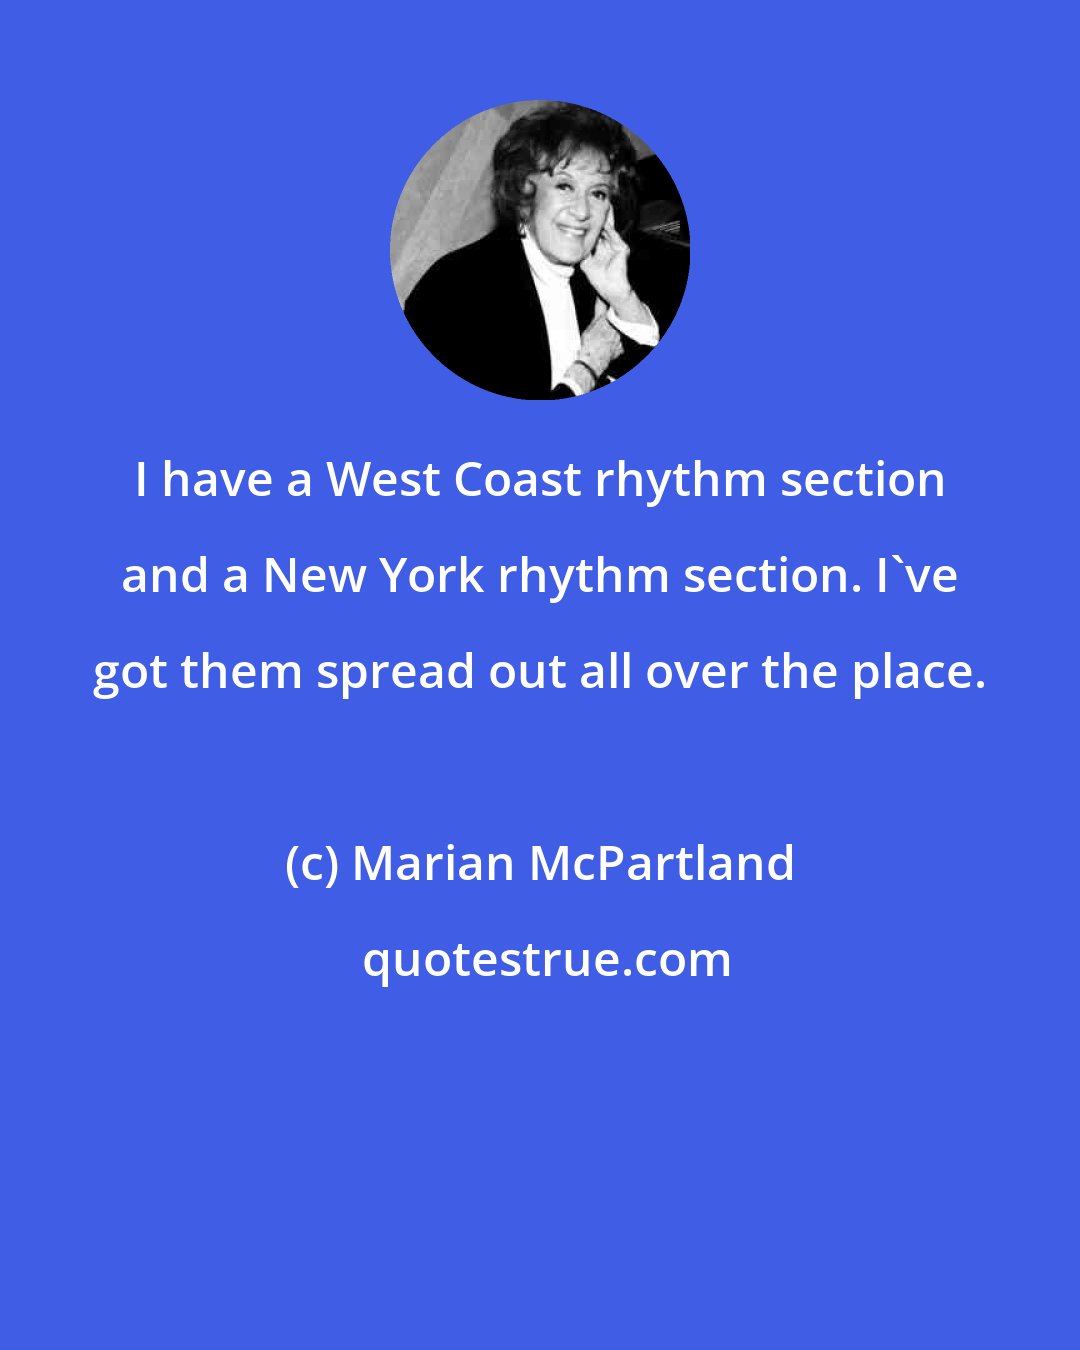 Marian McPartland: I have a West Coast rhythm section and a New York rhythm section. I've got them spread out all over the place.